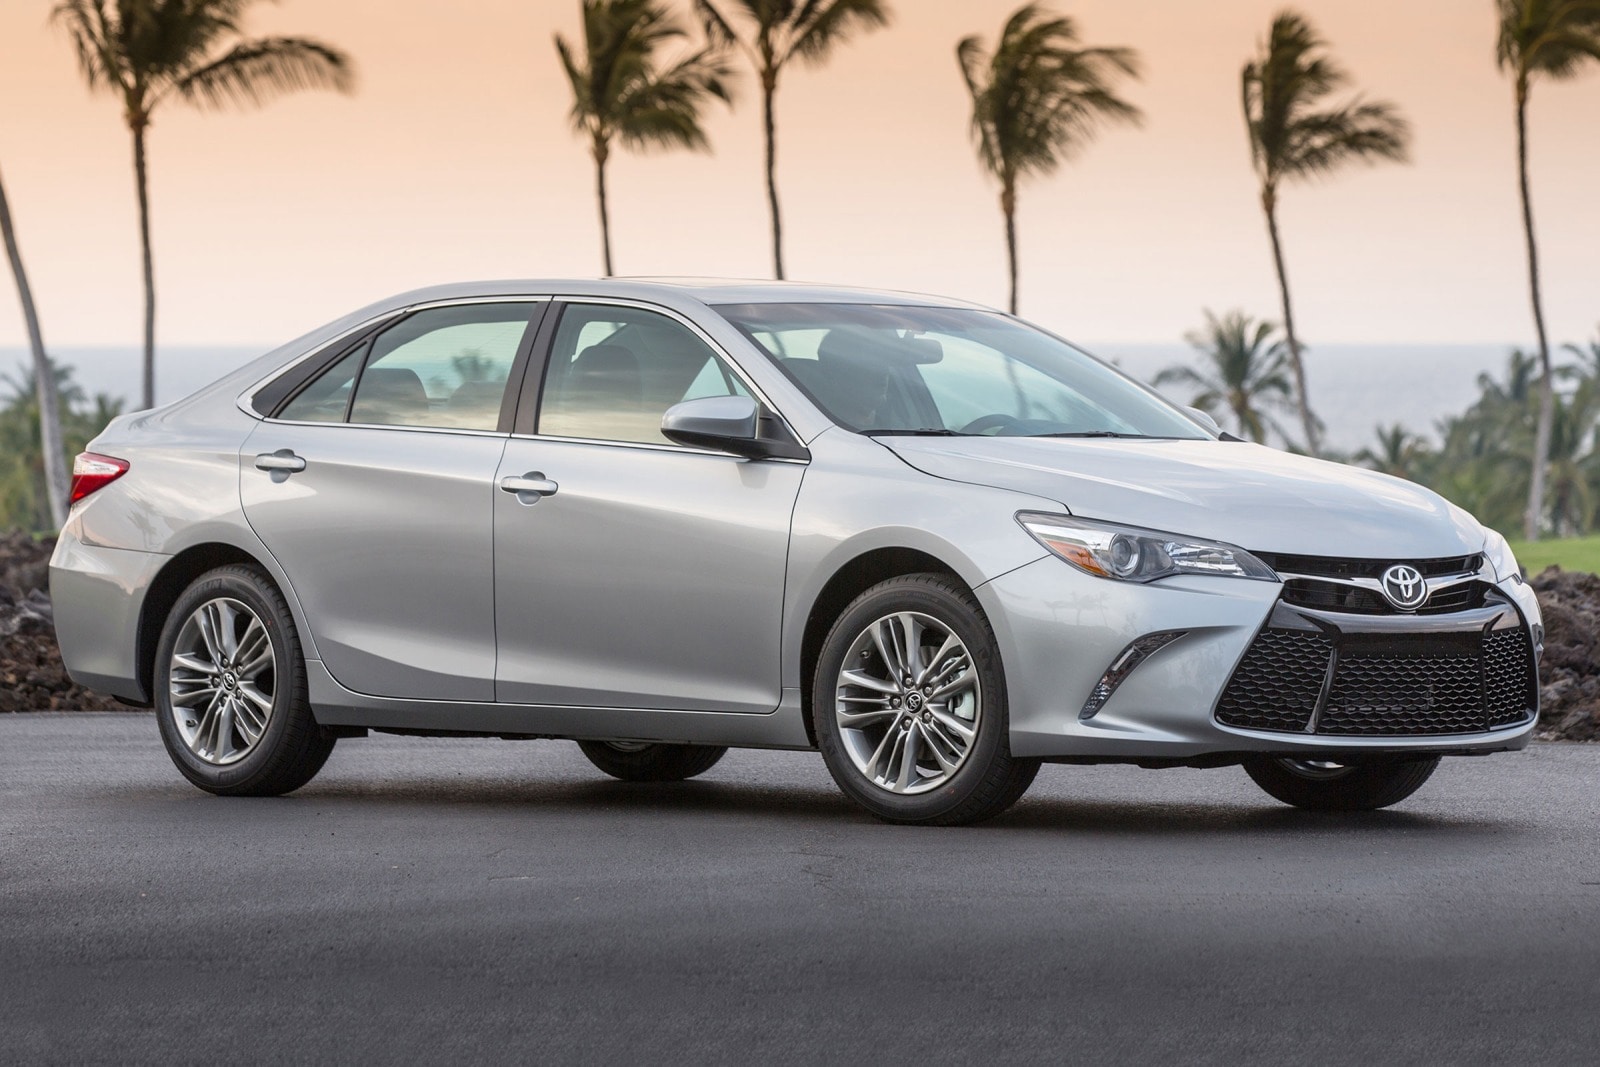 Used 2017 Toyota Camry Sedan Review | Edmunds